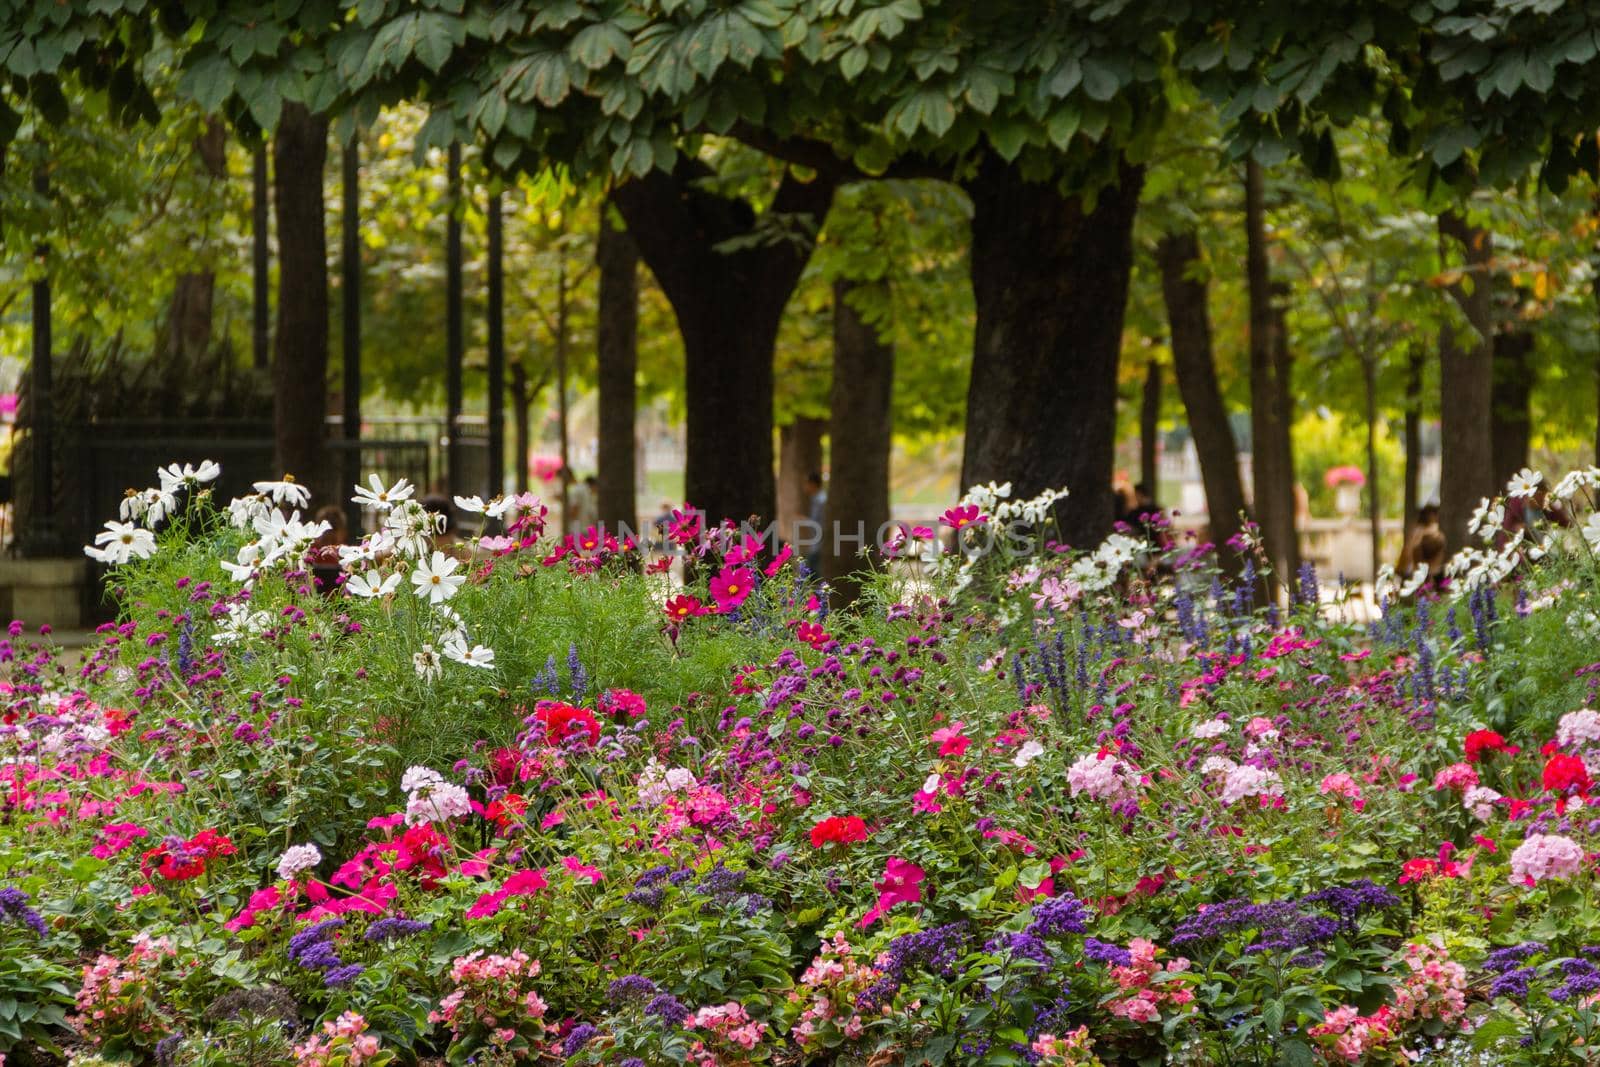 Astonishing view of beautiful purple, white, and pink flowers with long stems and trees as background. Group of different colorful and aromatic flowers in park. Lovely natural landscapes